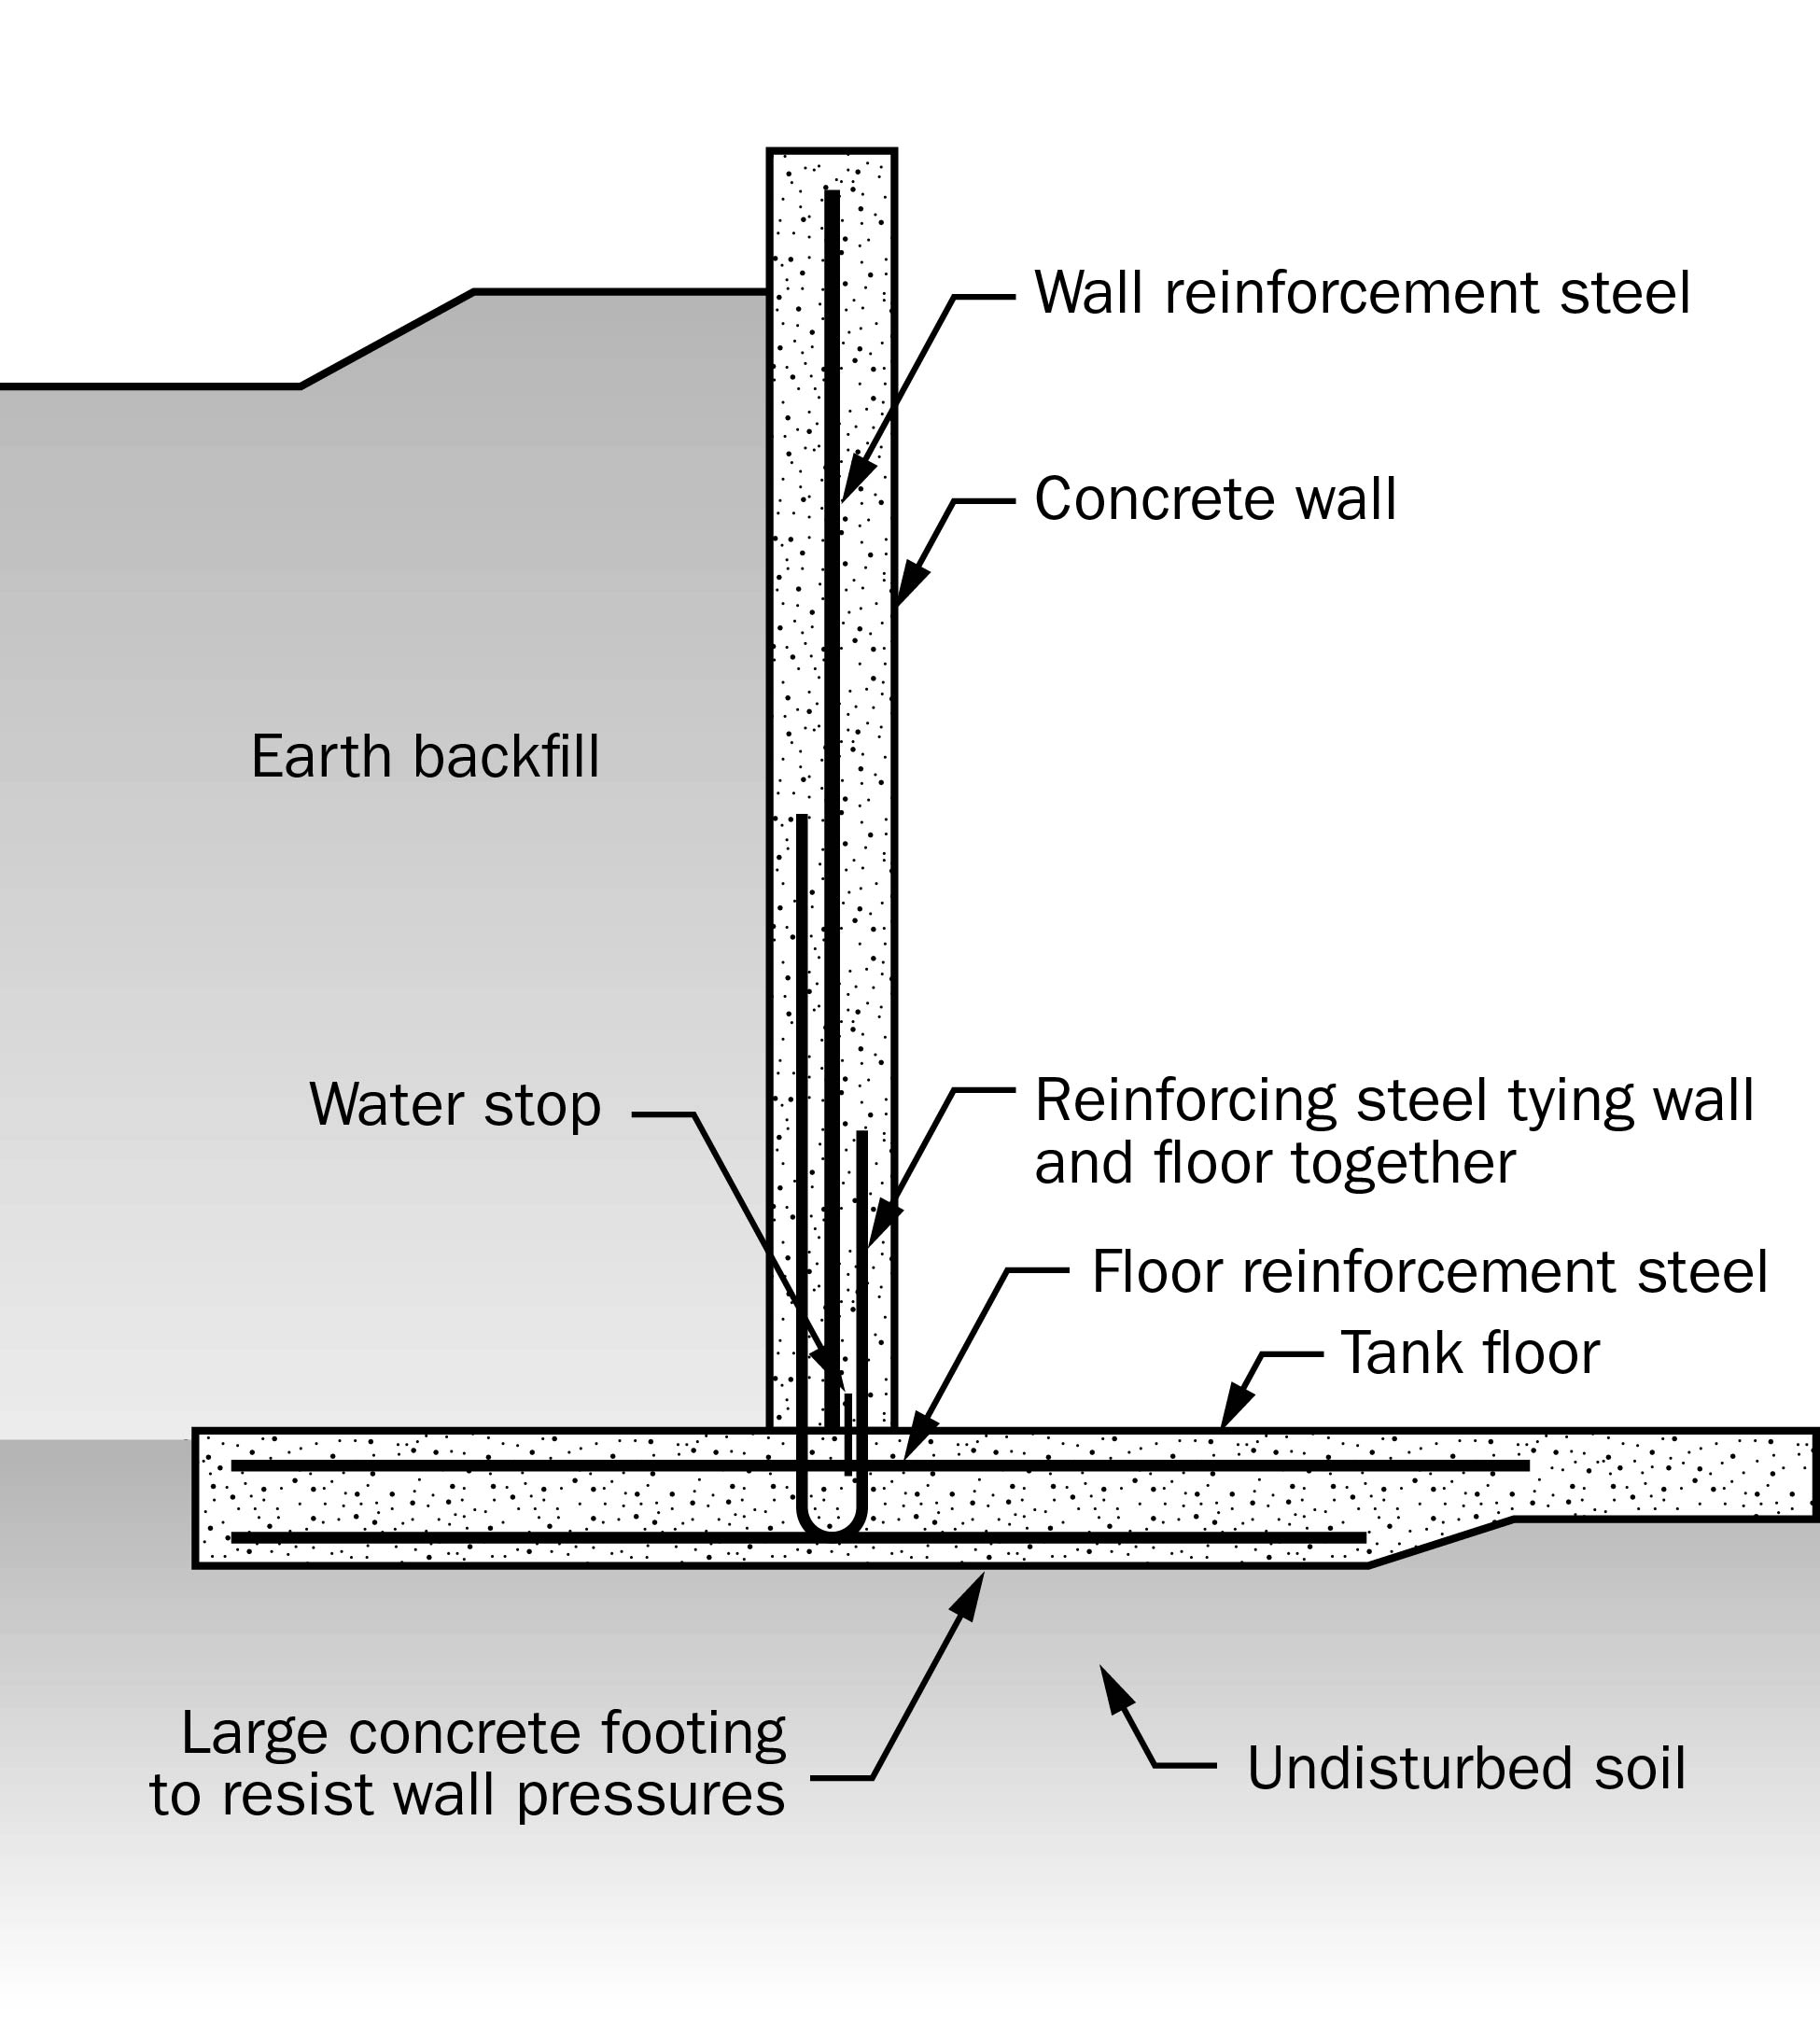 Profile of a manure storage wall construction